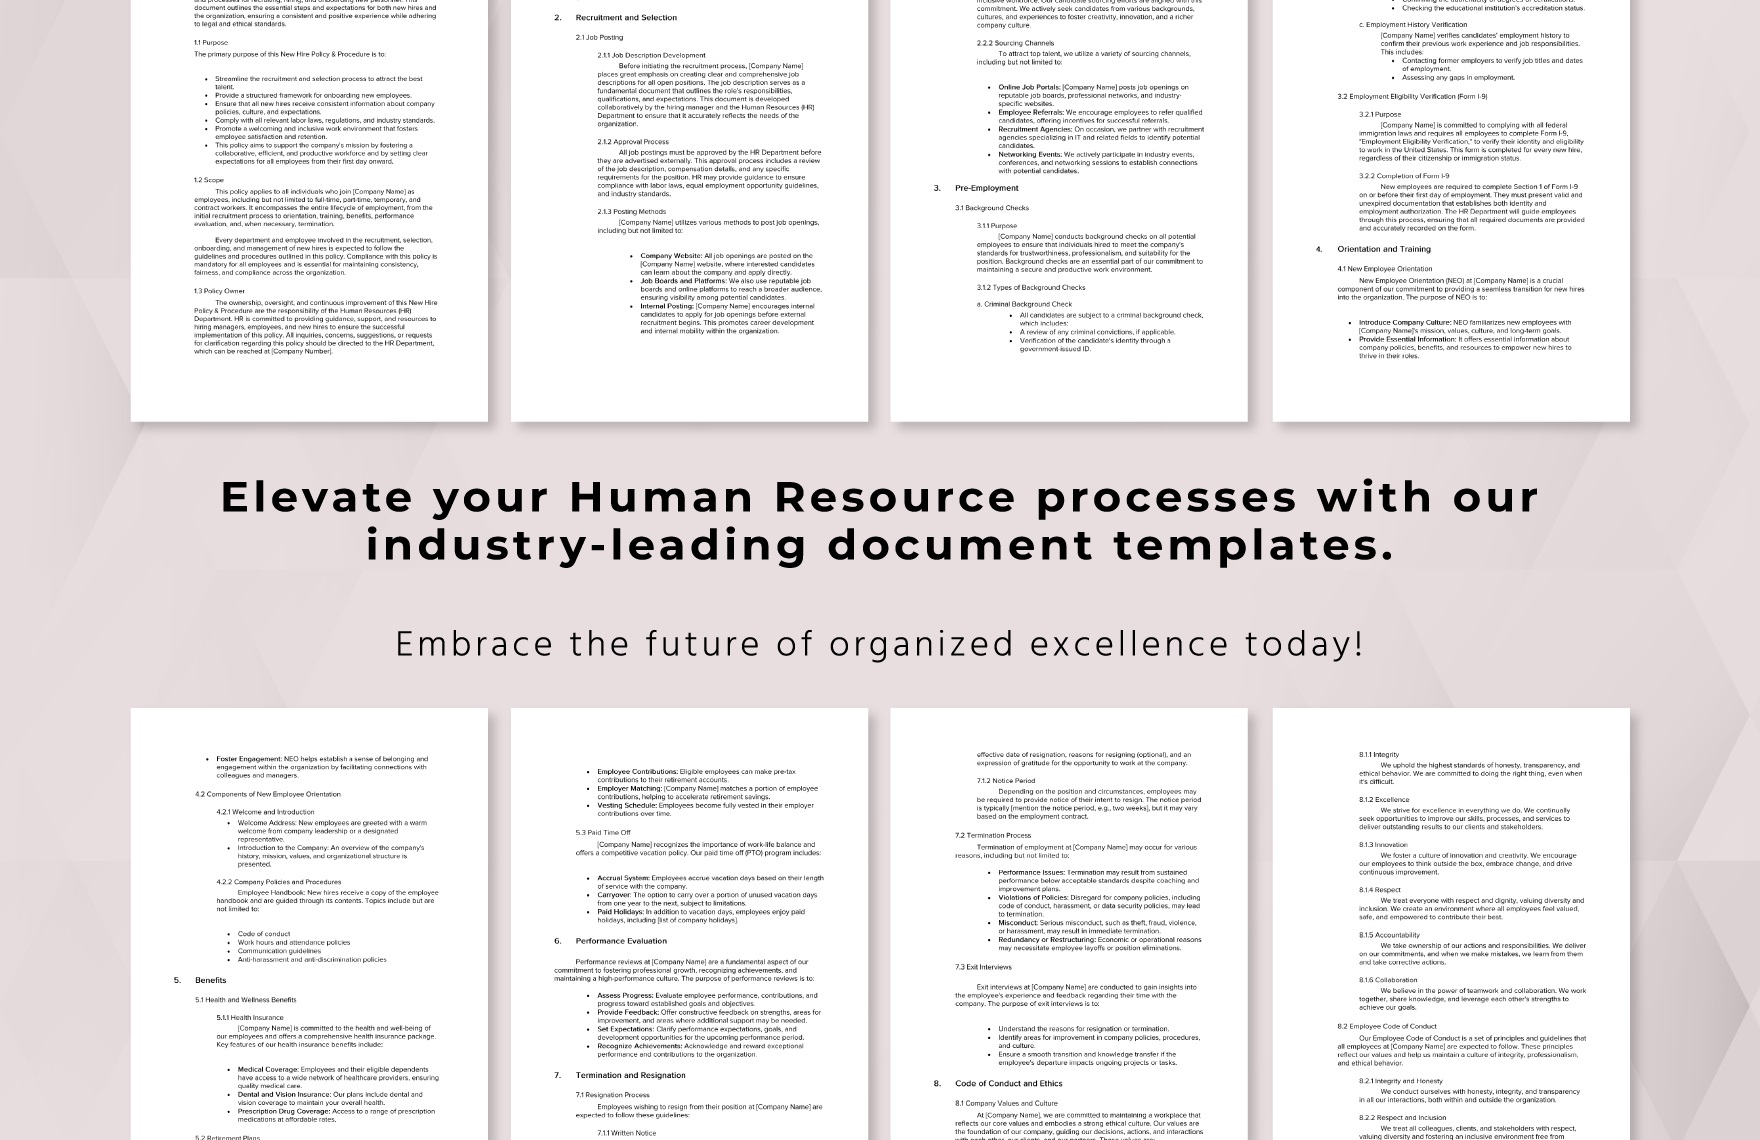 New Hire Policy & Procedure HR Template